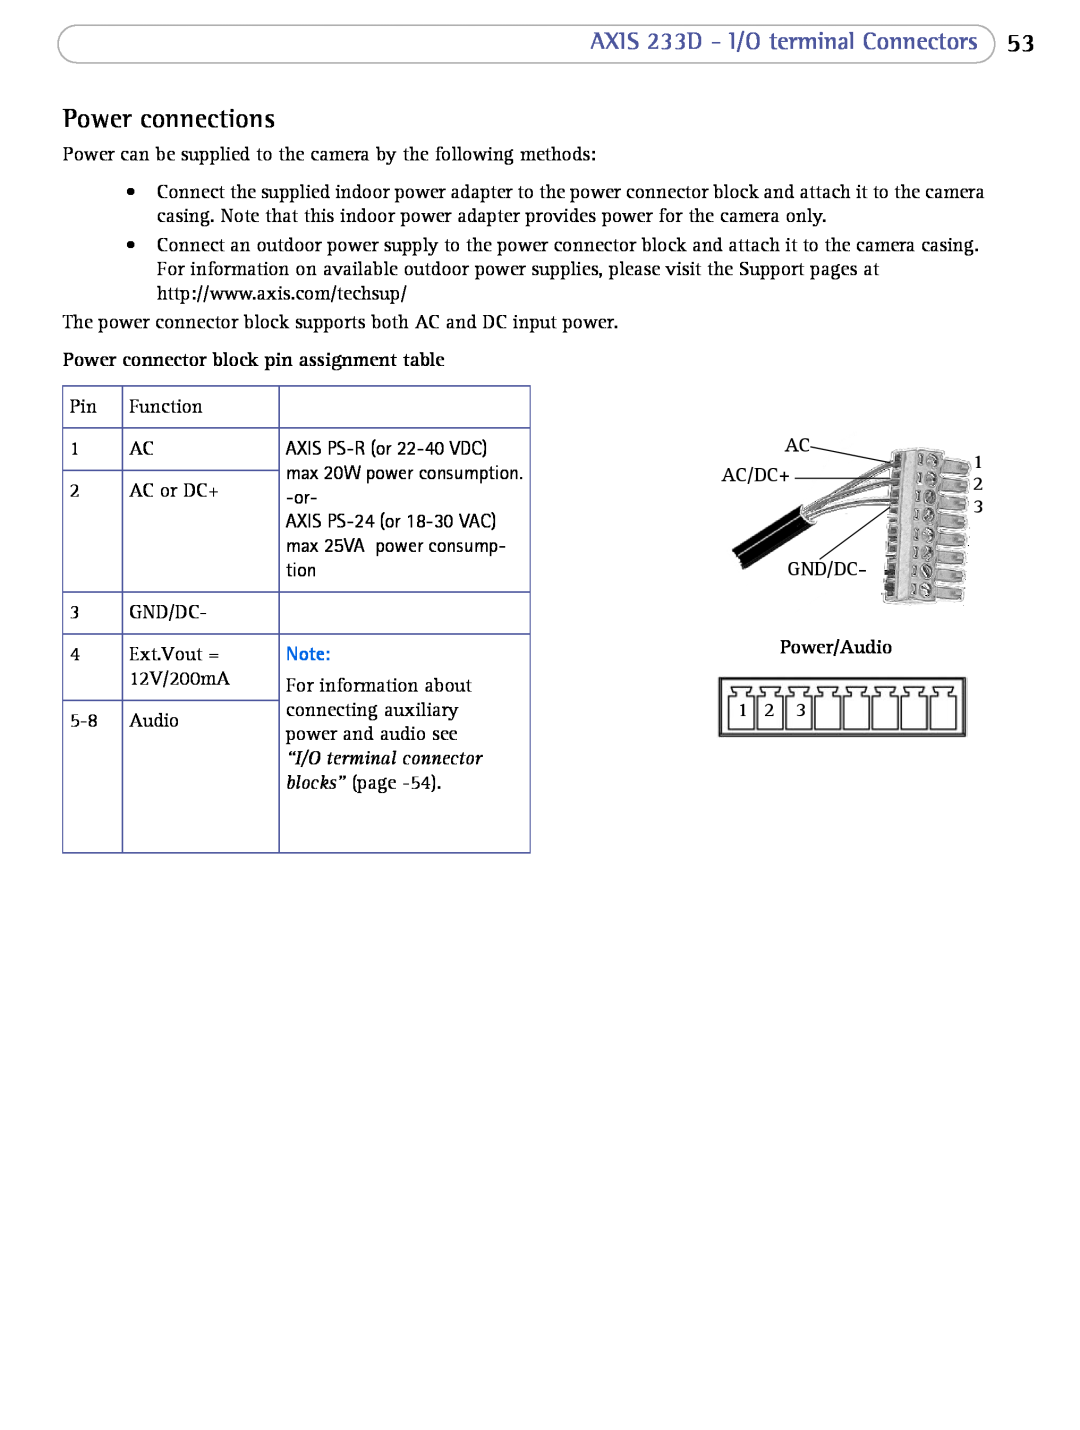 Axis Communications user manual Power connections, AXIS 233D - I/O terminal Connectors, “I/O terminal connector 